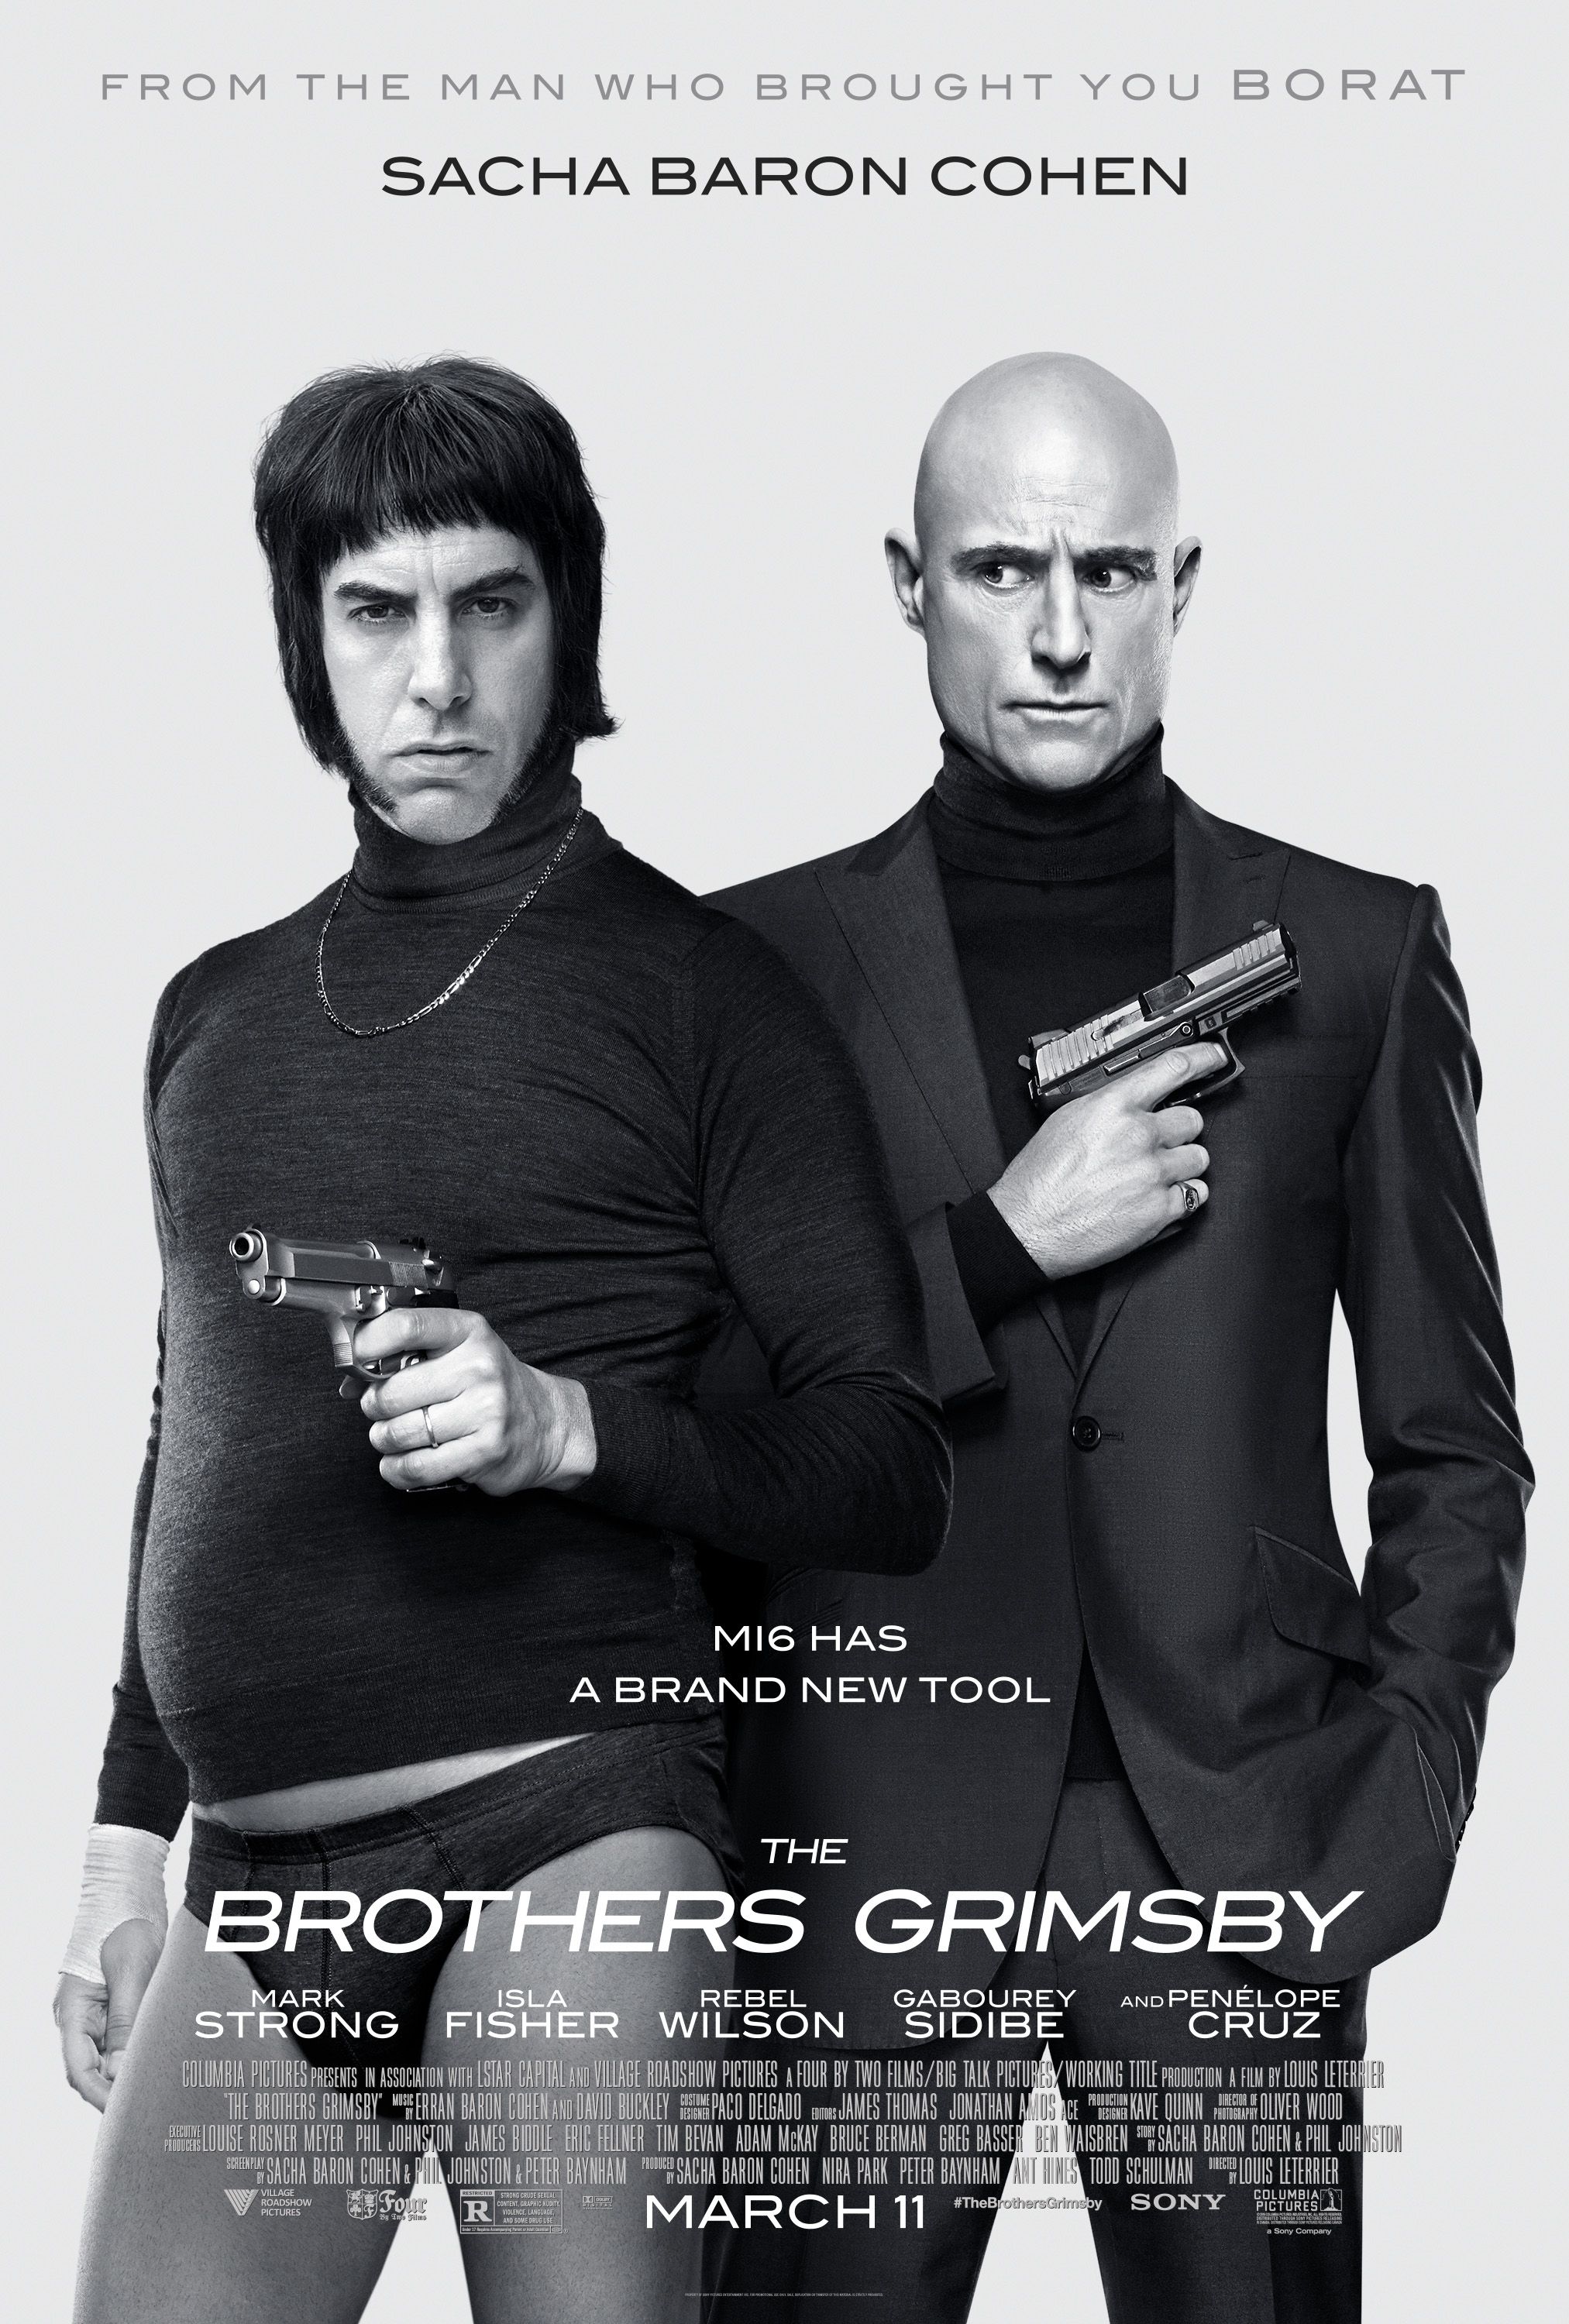 The Brothers Grimsby Film Poster